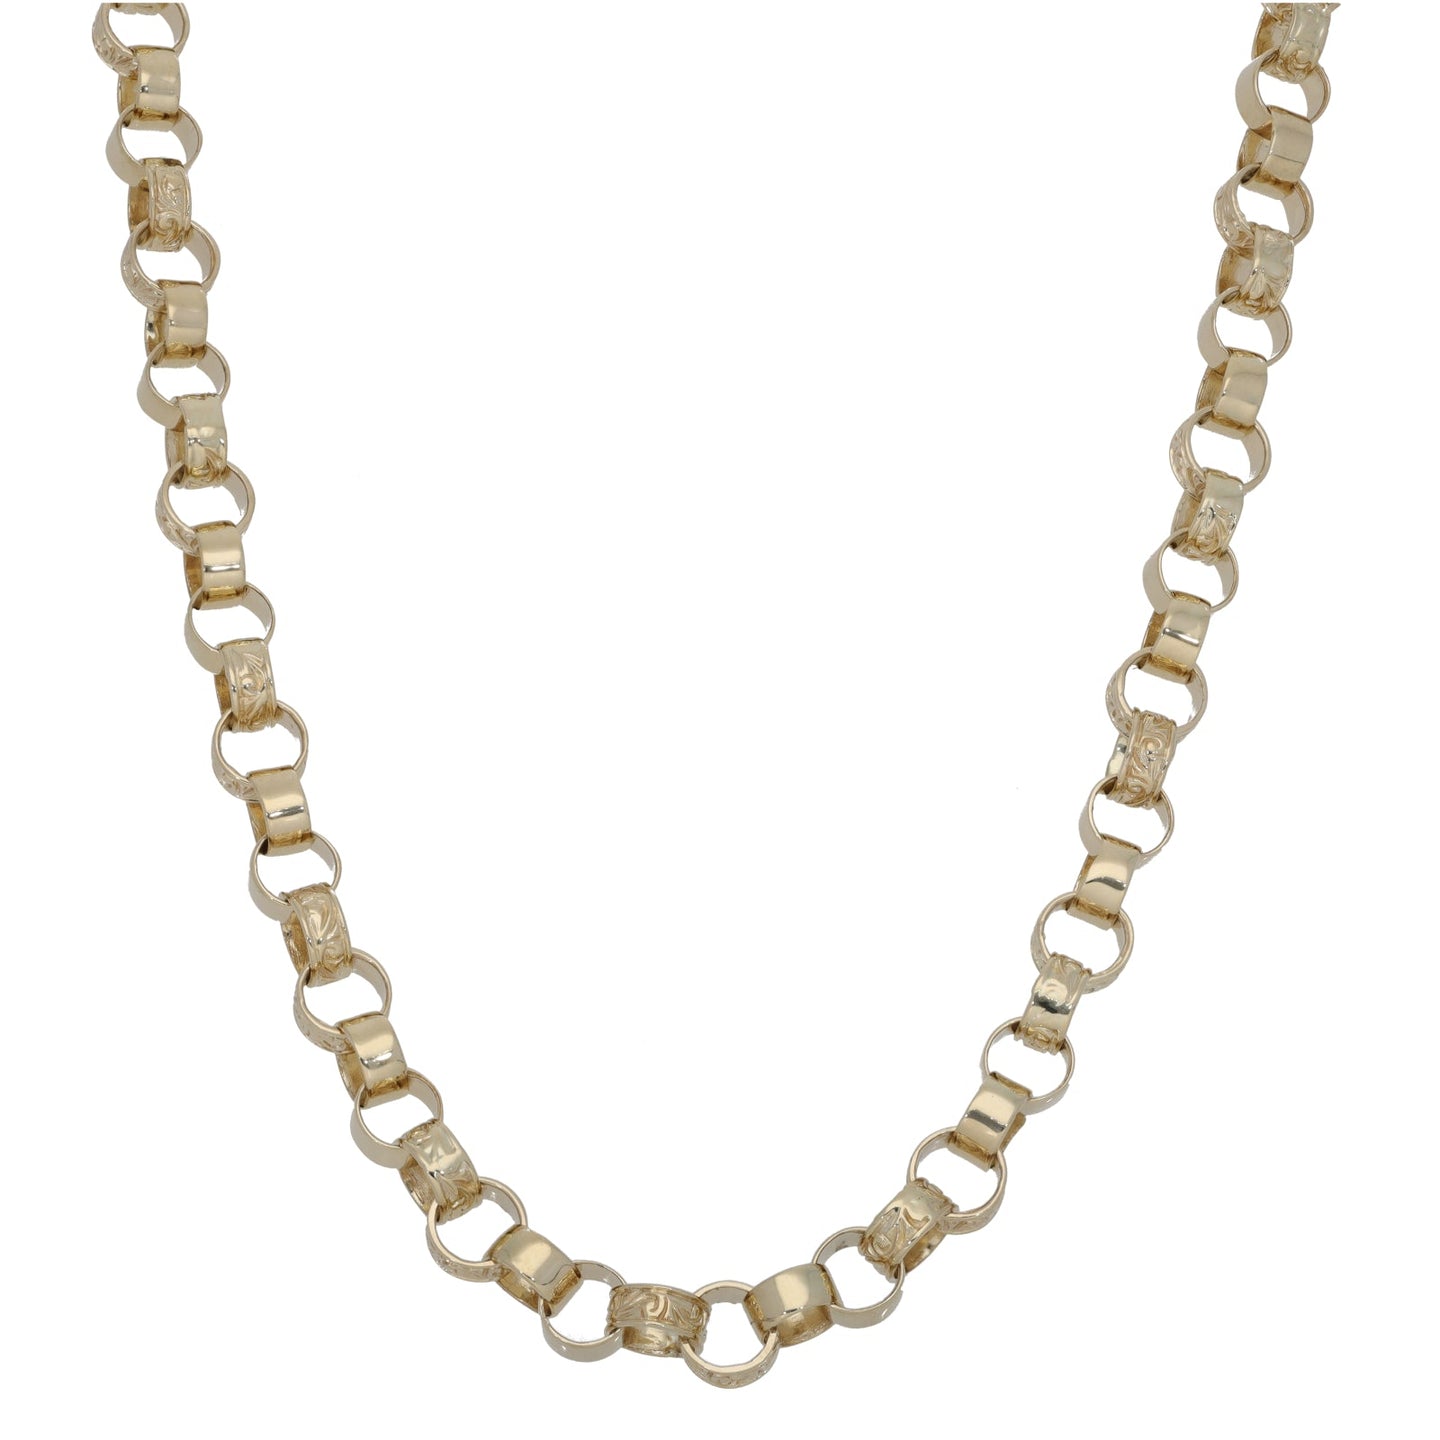 9ct Gold Patterned Belcher Chain